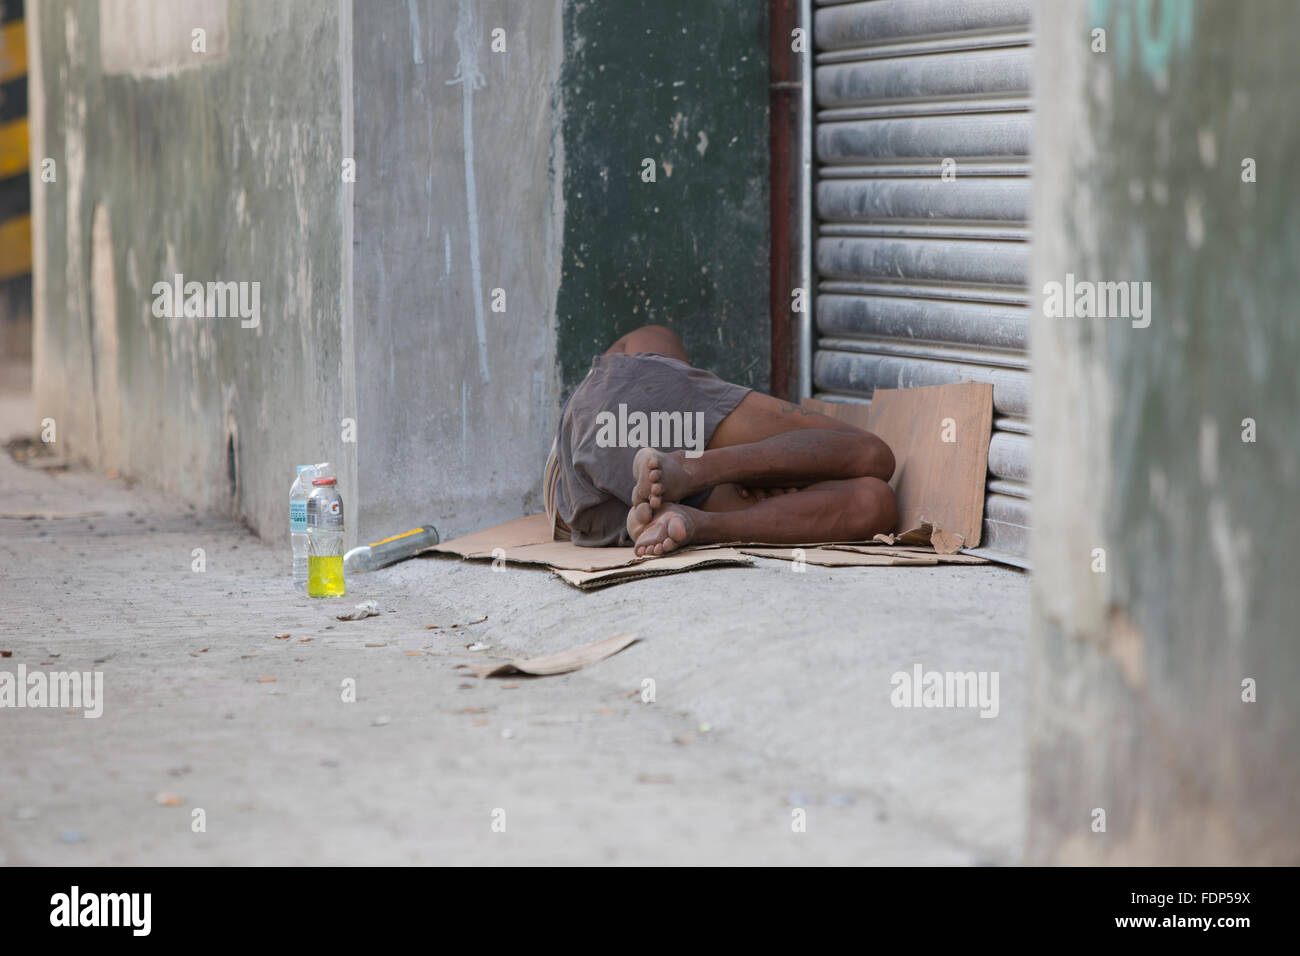 Homeless Person sleeping in a side street,Downtown Cebu City,Philippines Stock Photo